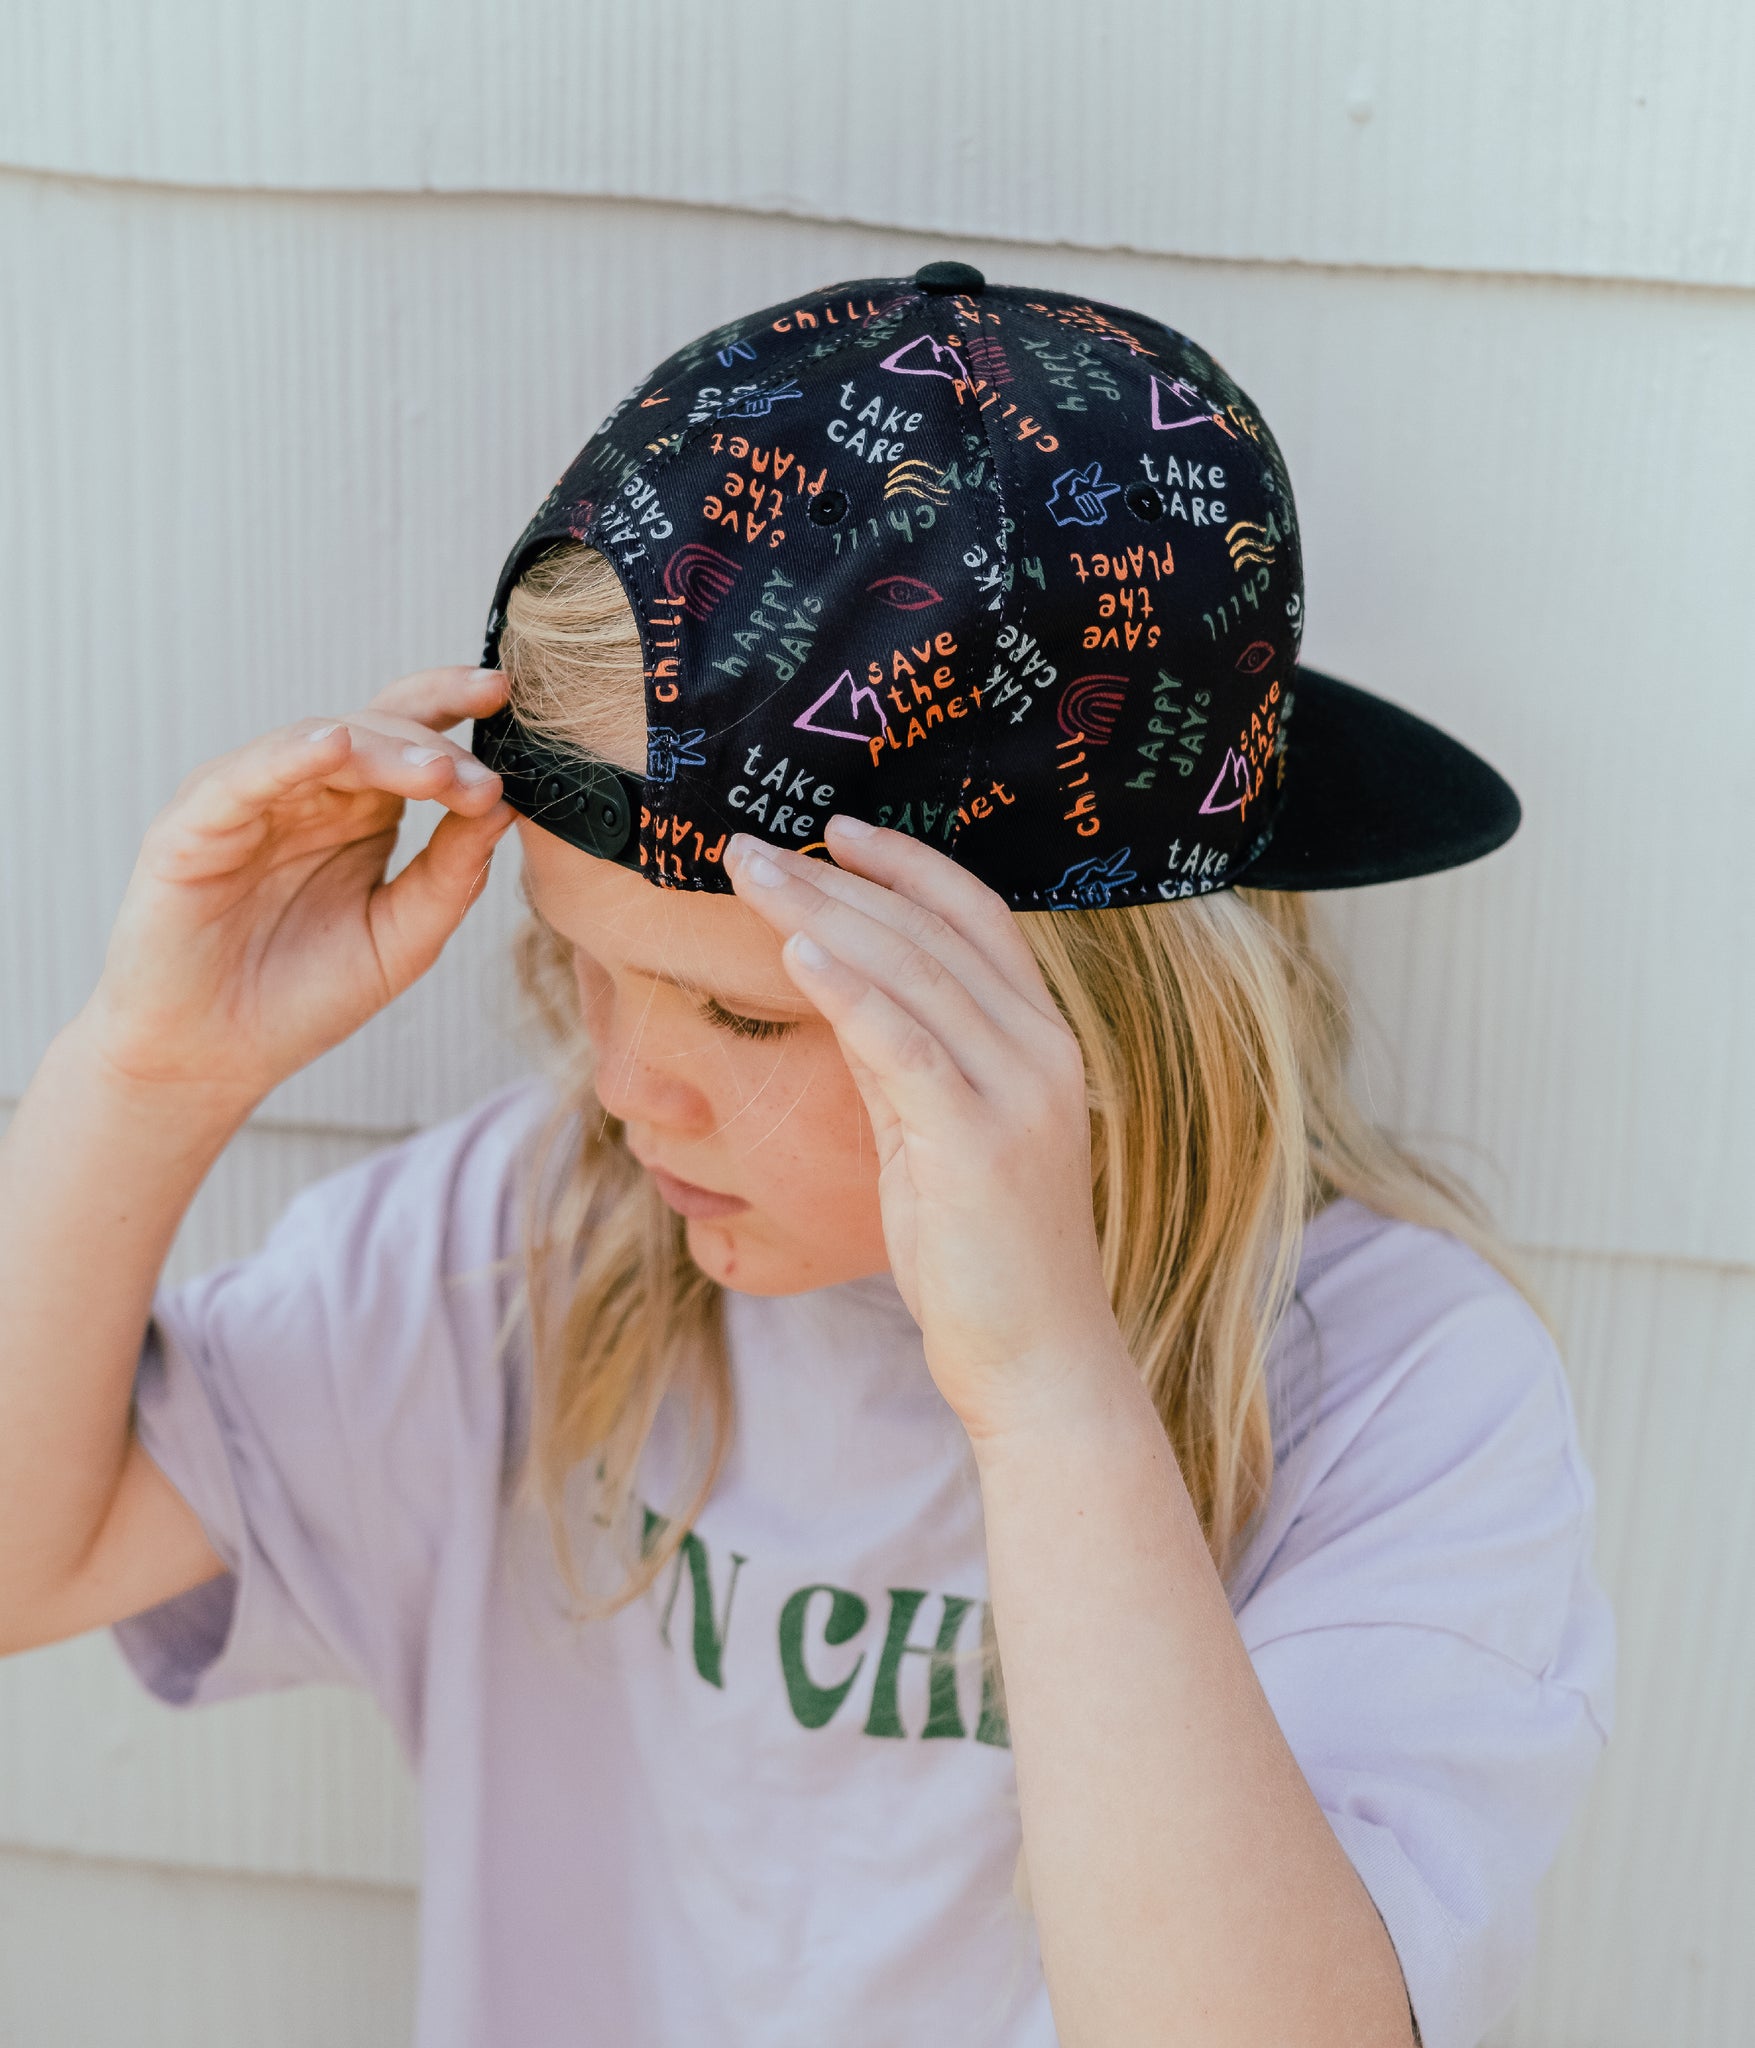 Tie Dye Beanie - Teal Steal hats for Kids and Babies | HEADSTER KIDS